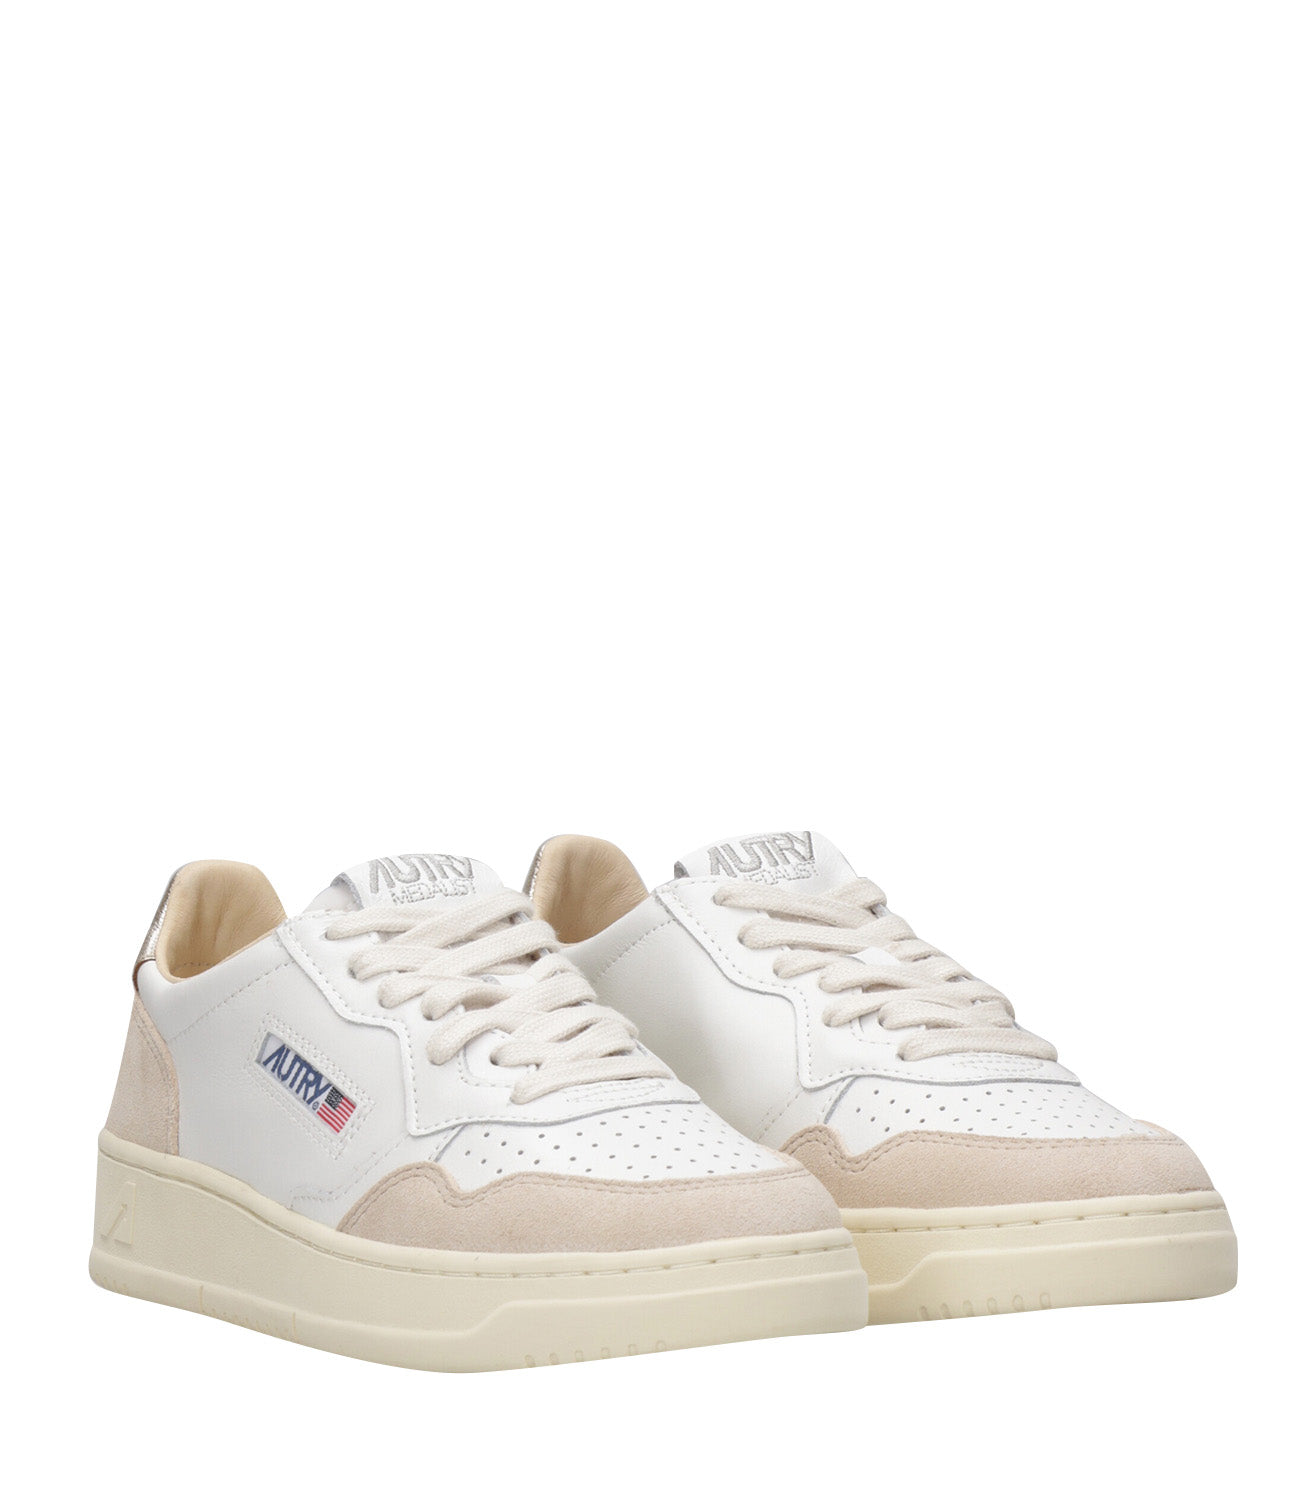 Autry | Sneakers Medalist Low Bianco e Oro